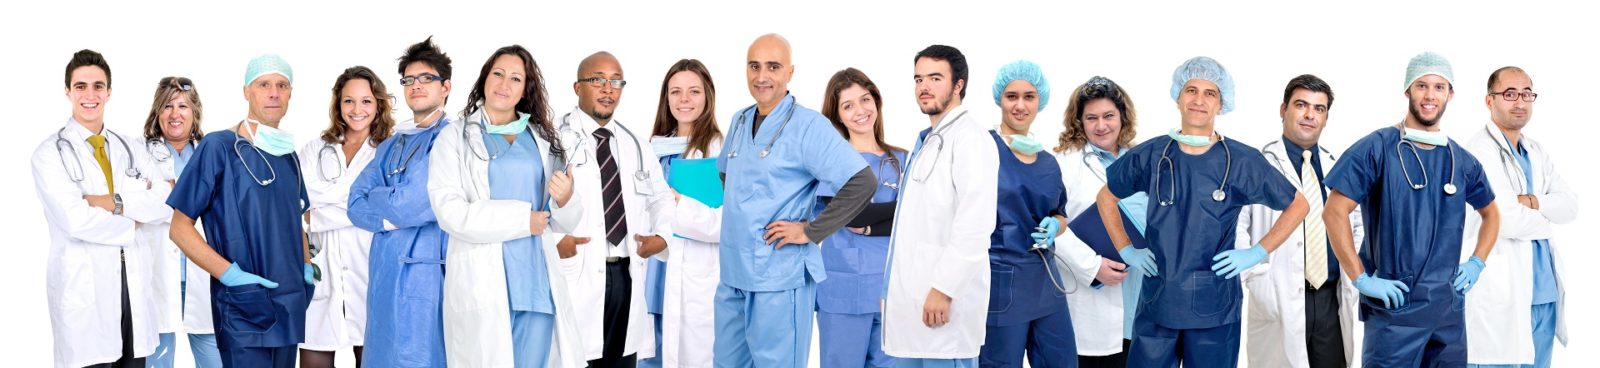 Medical Malpractice Insurance For Registered Medical Practitioners In Canada